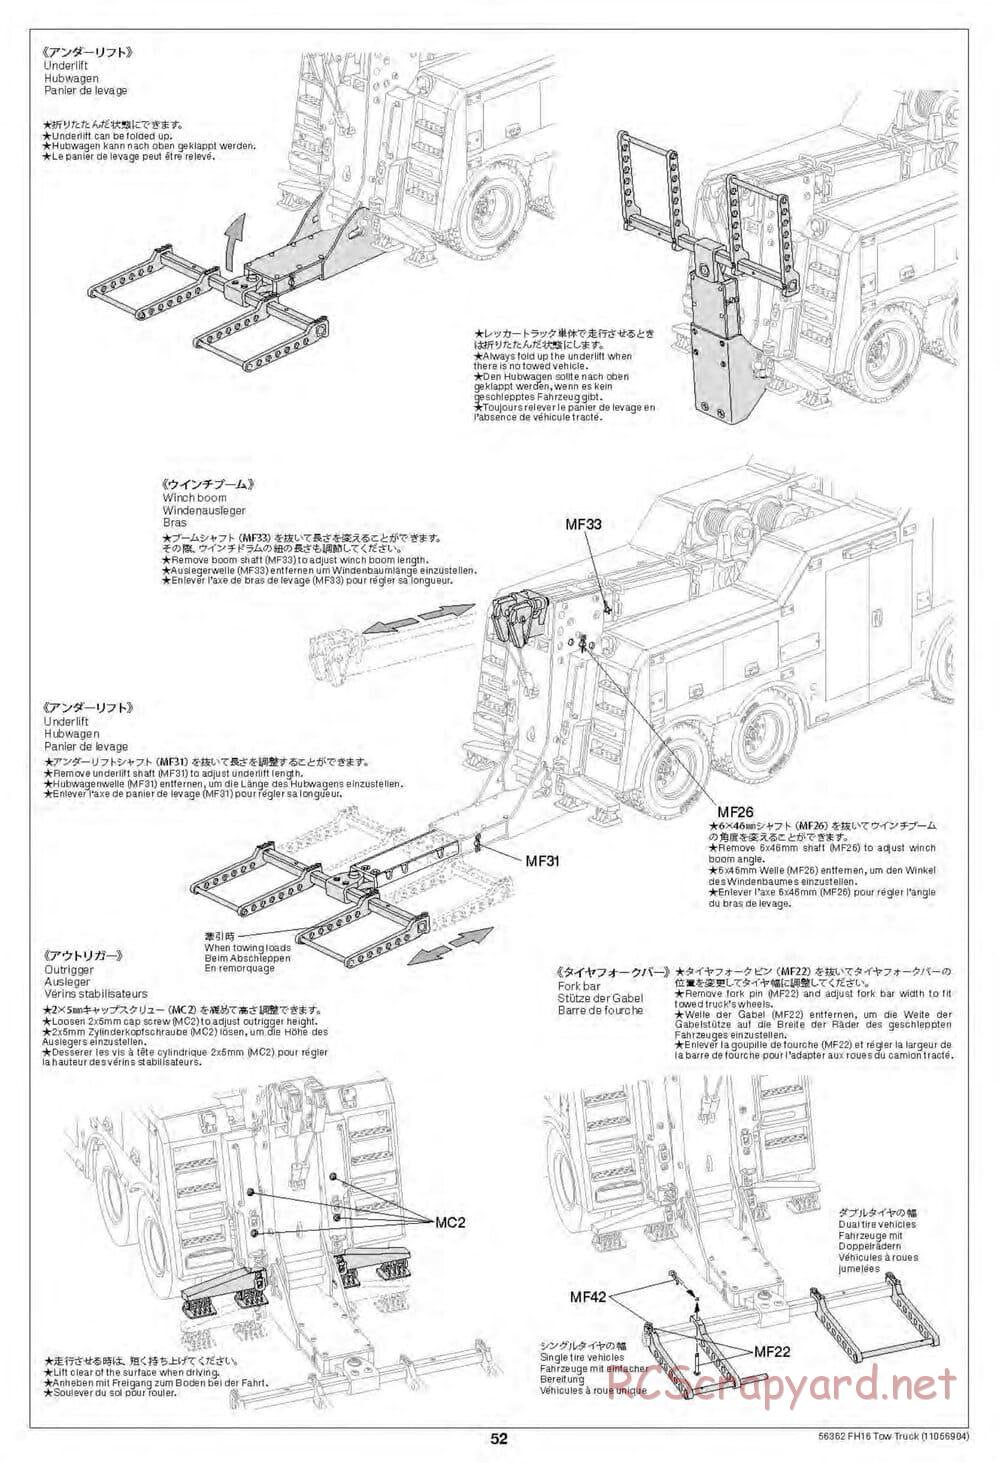 Tamiya - Volvo FH16 Globetrotter 750 8x4 Tow Truck - Manual - Page 52